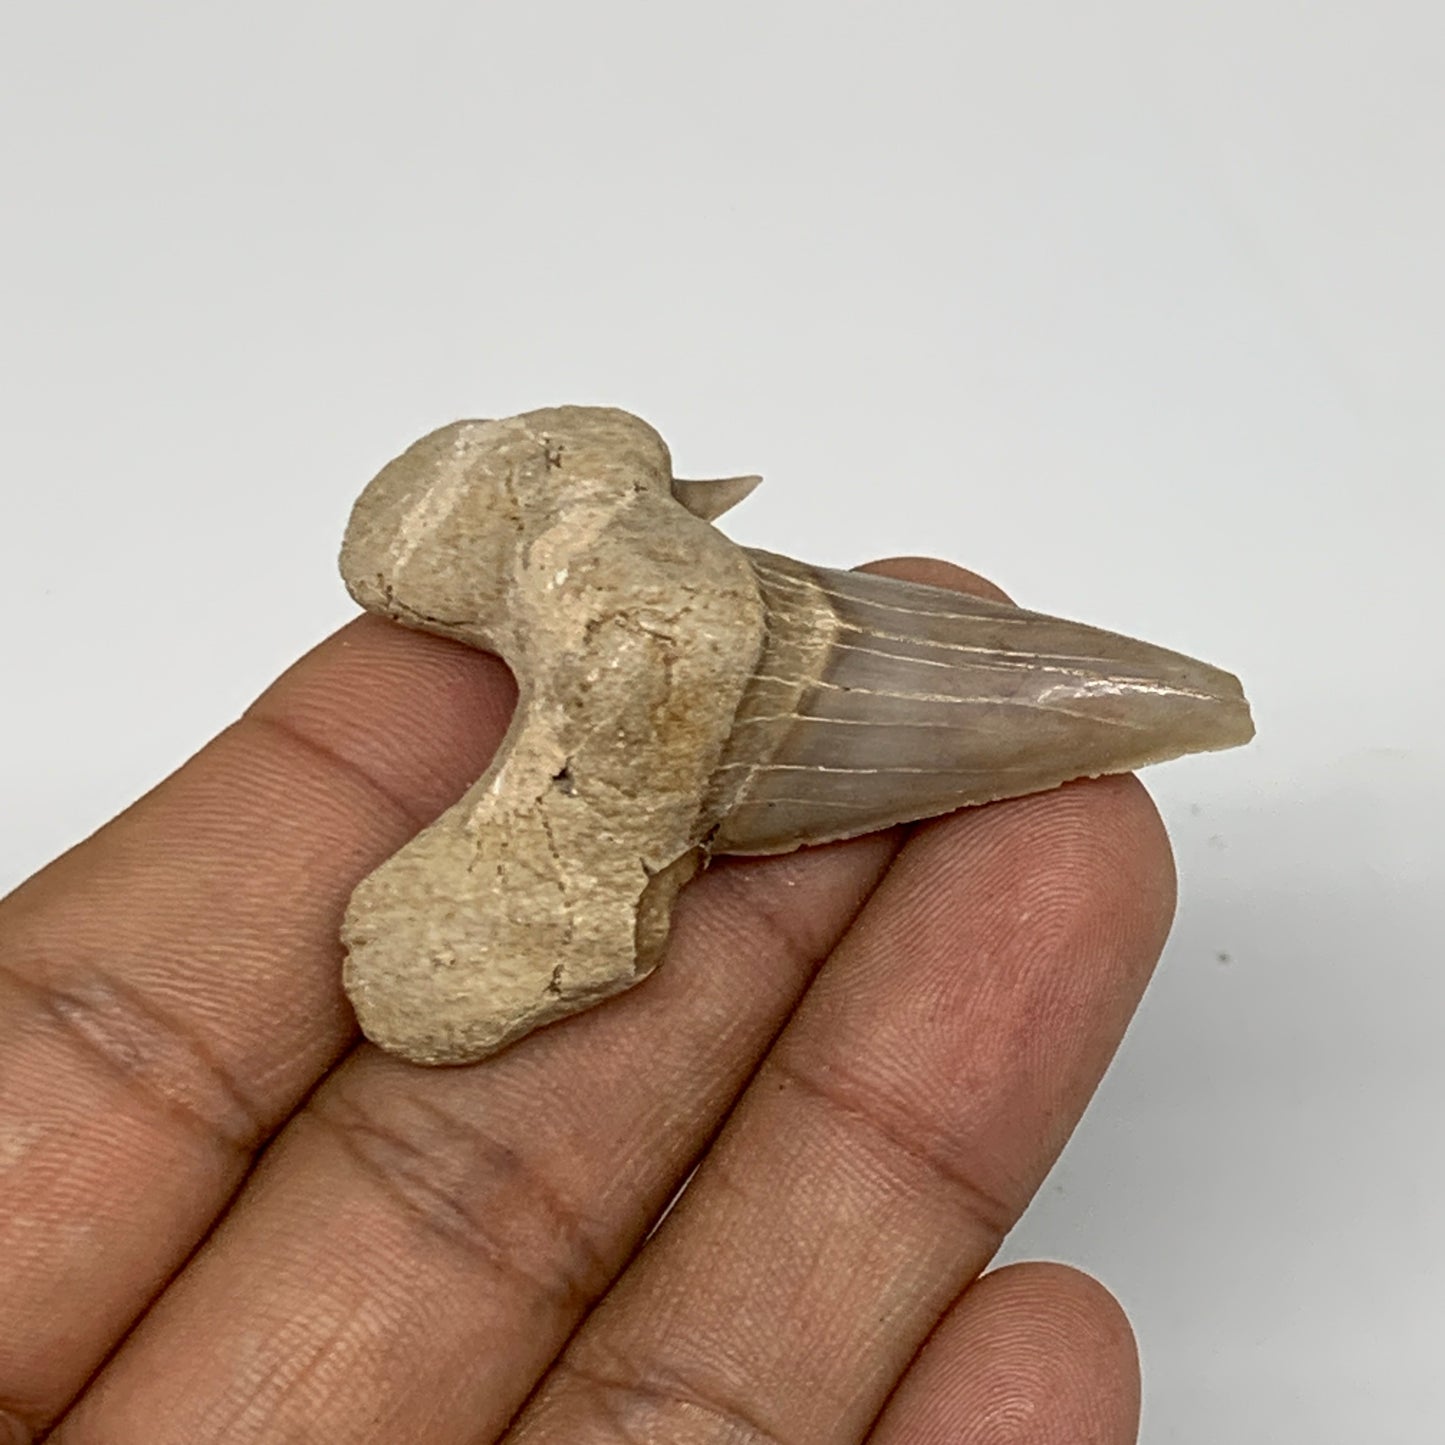 14.6g, 1.9"X 1.4"x 0.5" Natural Fossils Fish Shark Tooth @Morocco, B12656